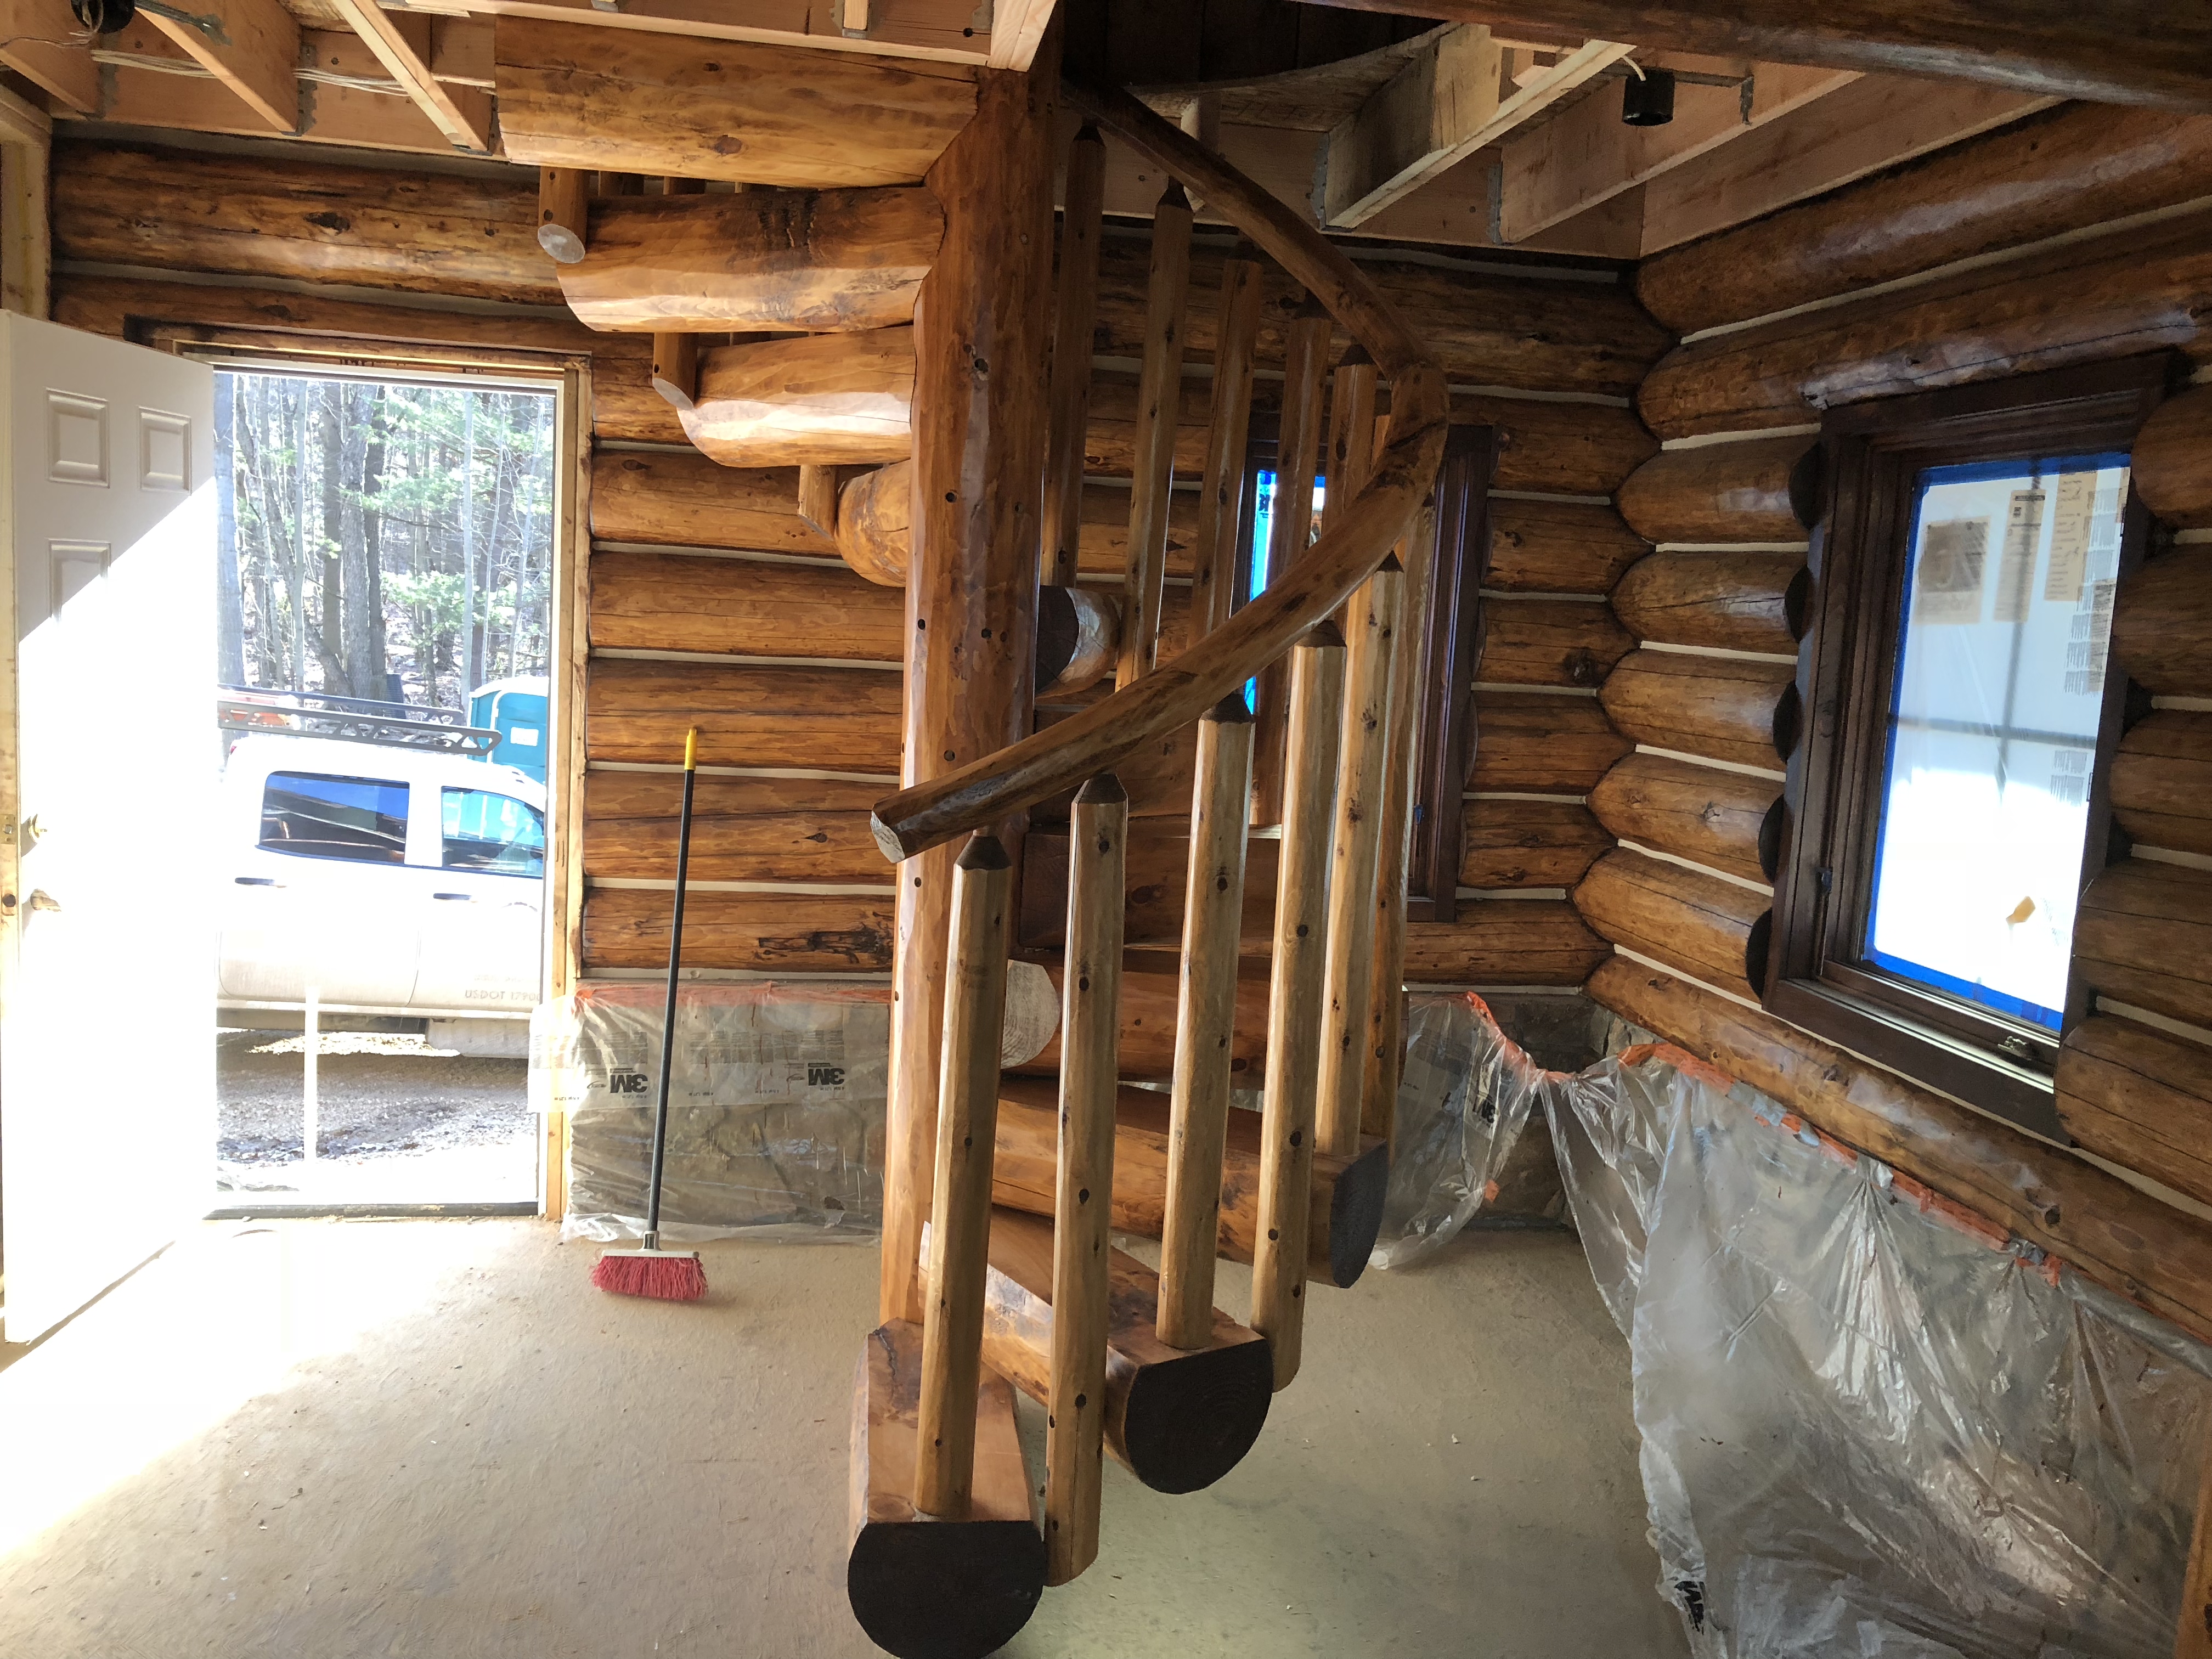 Spiral log staircase pre-stained English Chestnut. Rustic railing